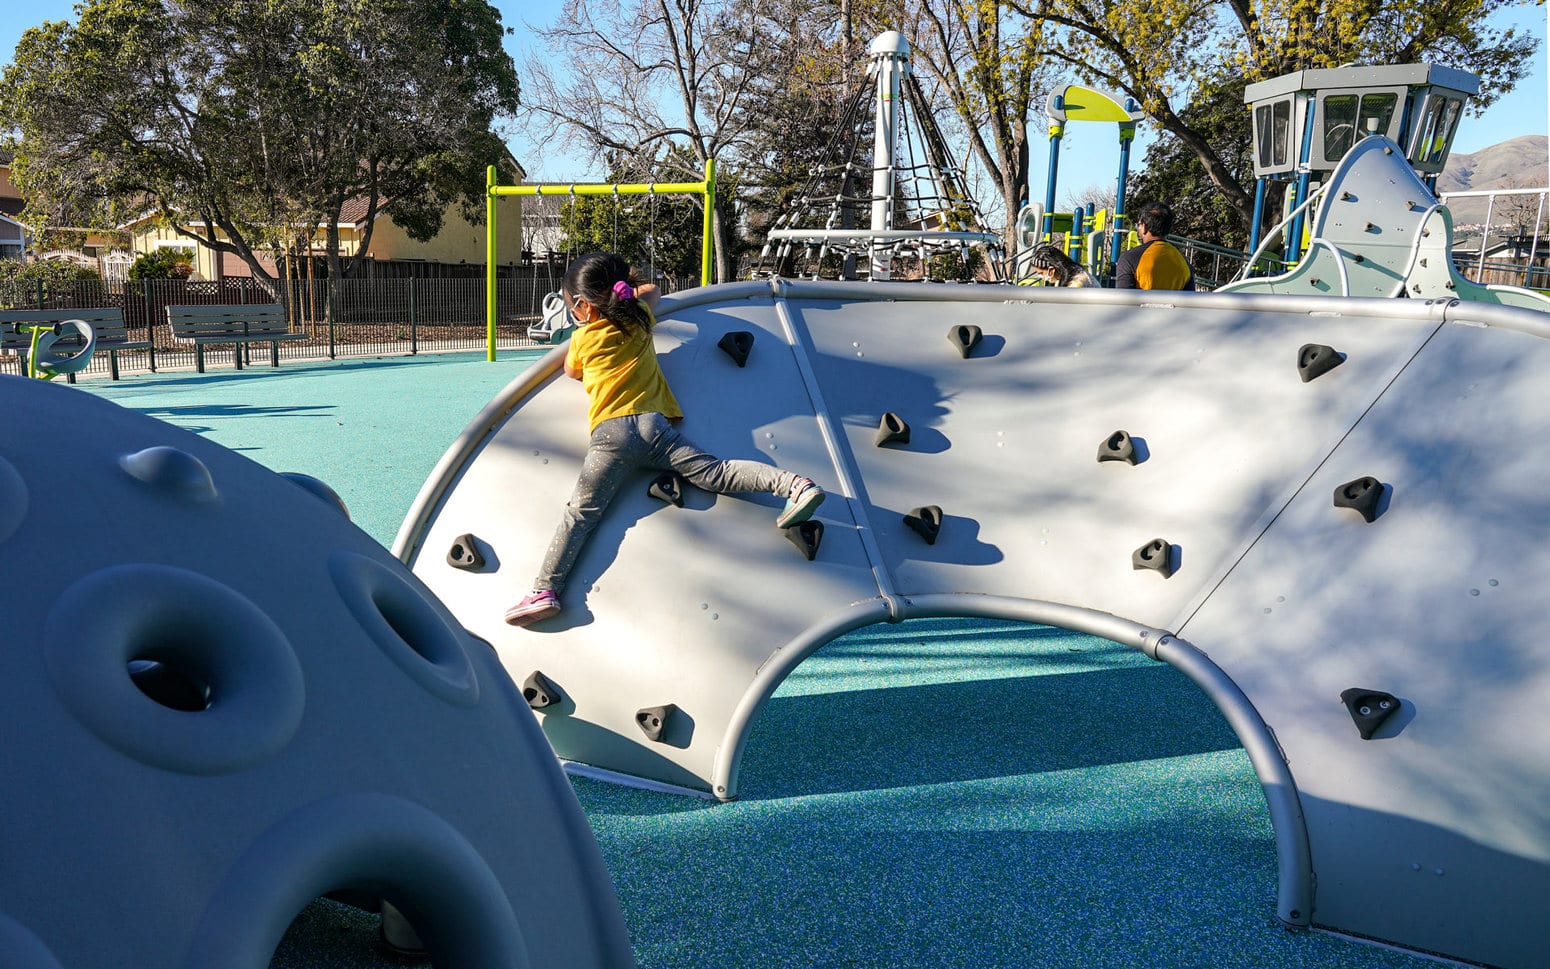 Child playing on play equipment